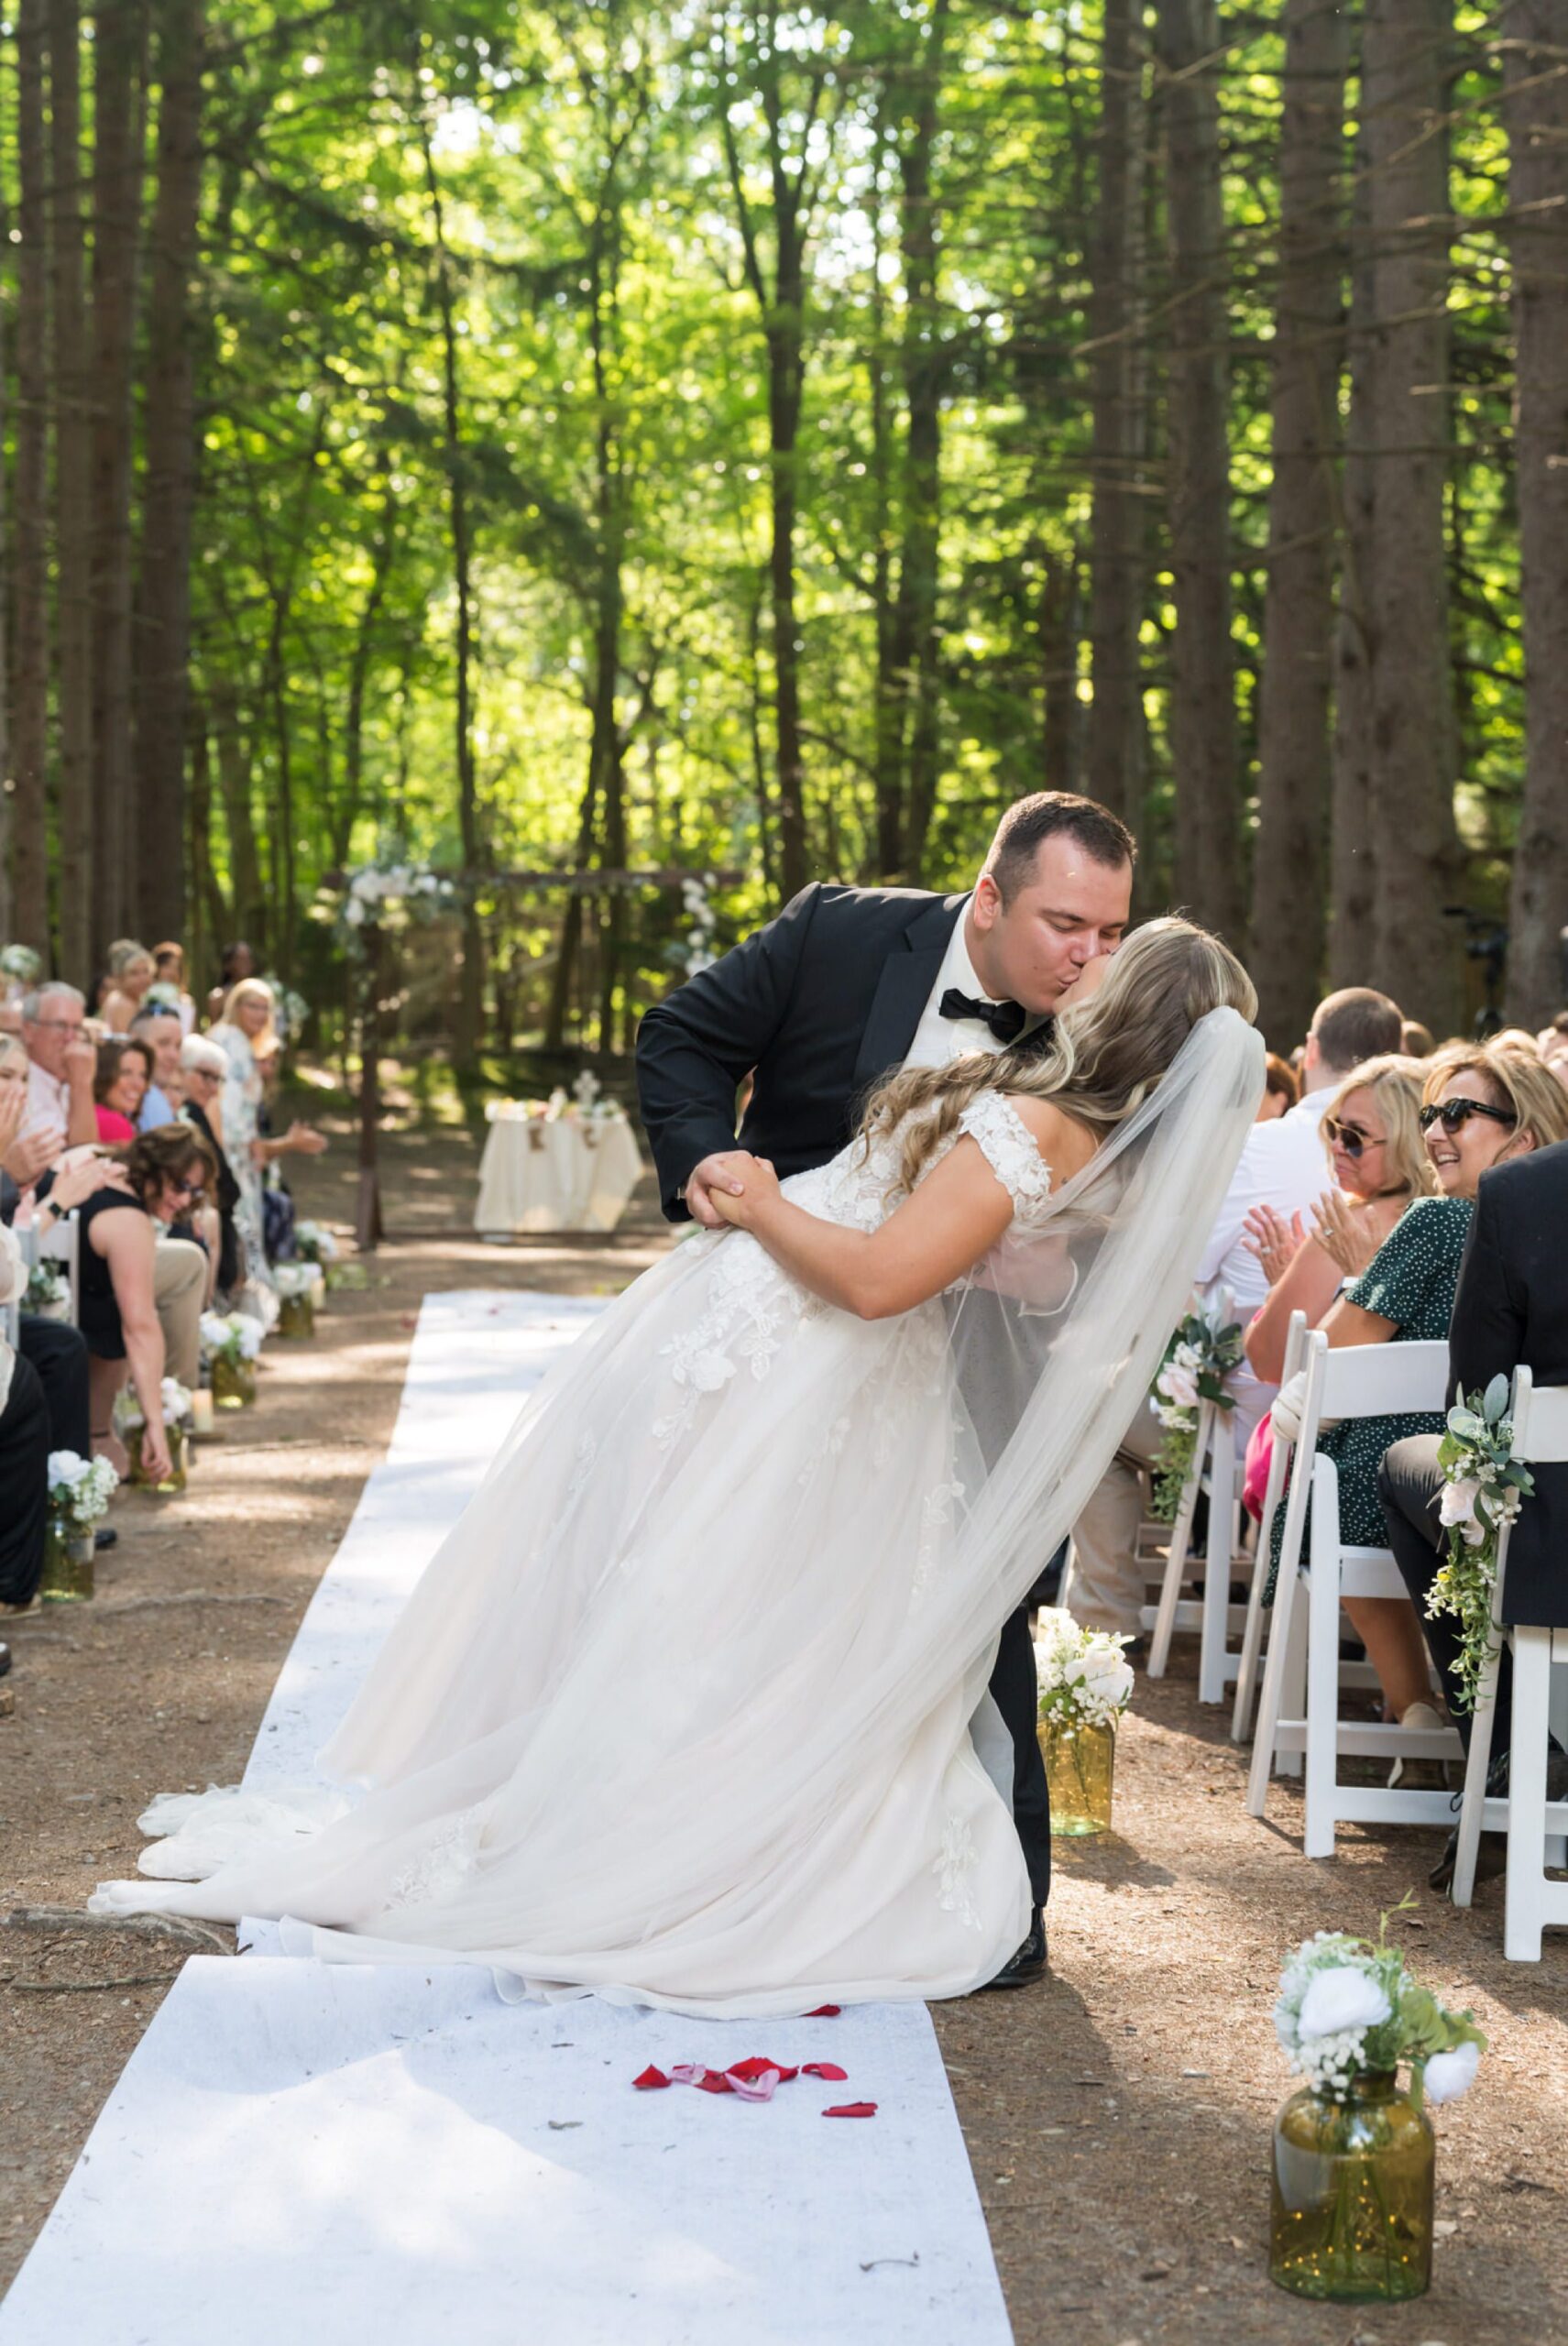 The bride and groom kiss at the end of the aisle at their Stony Creek wedding in The Pines.  